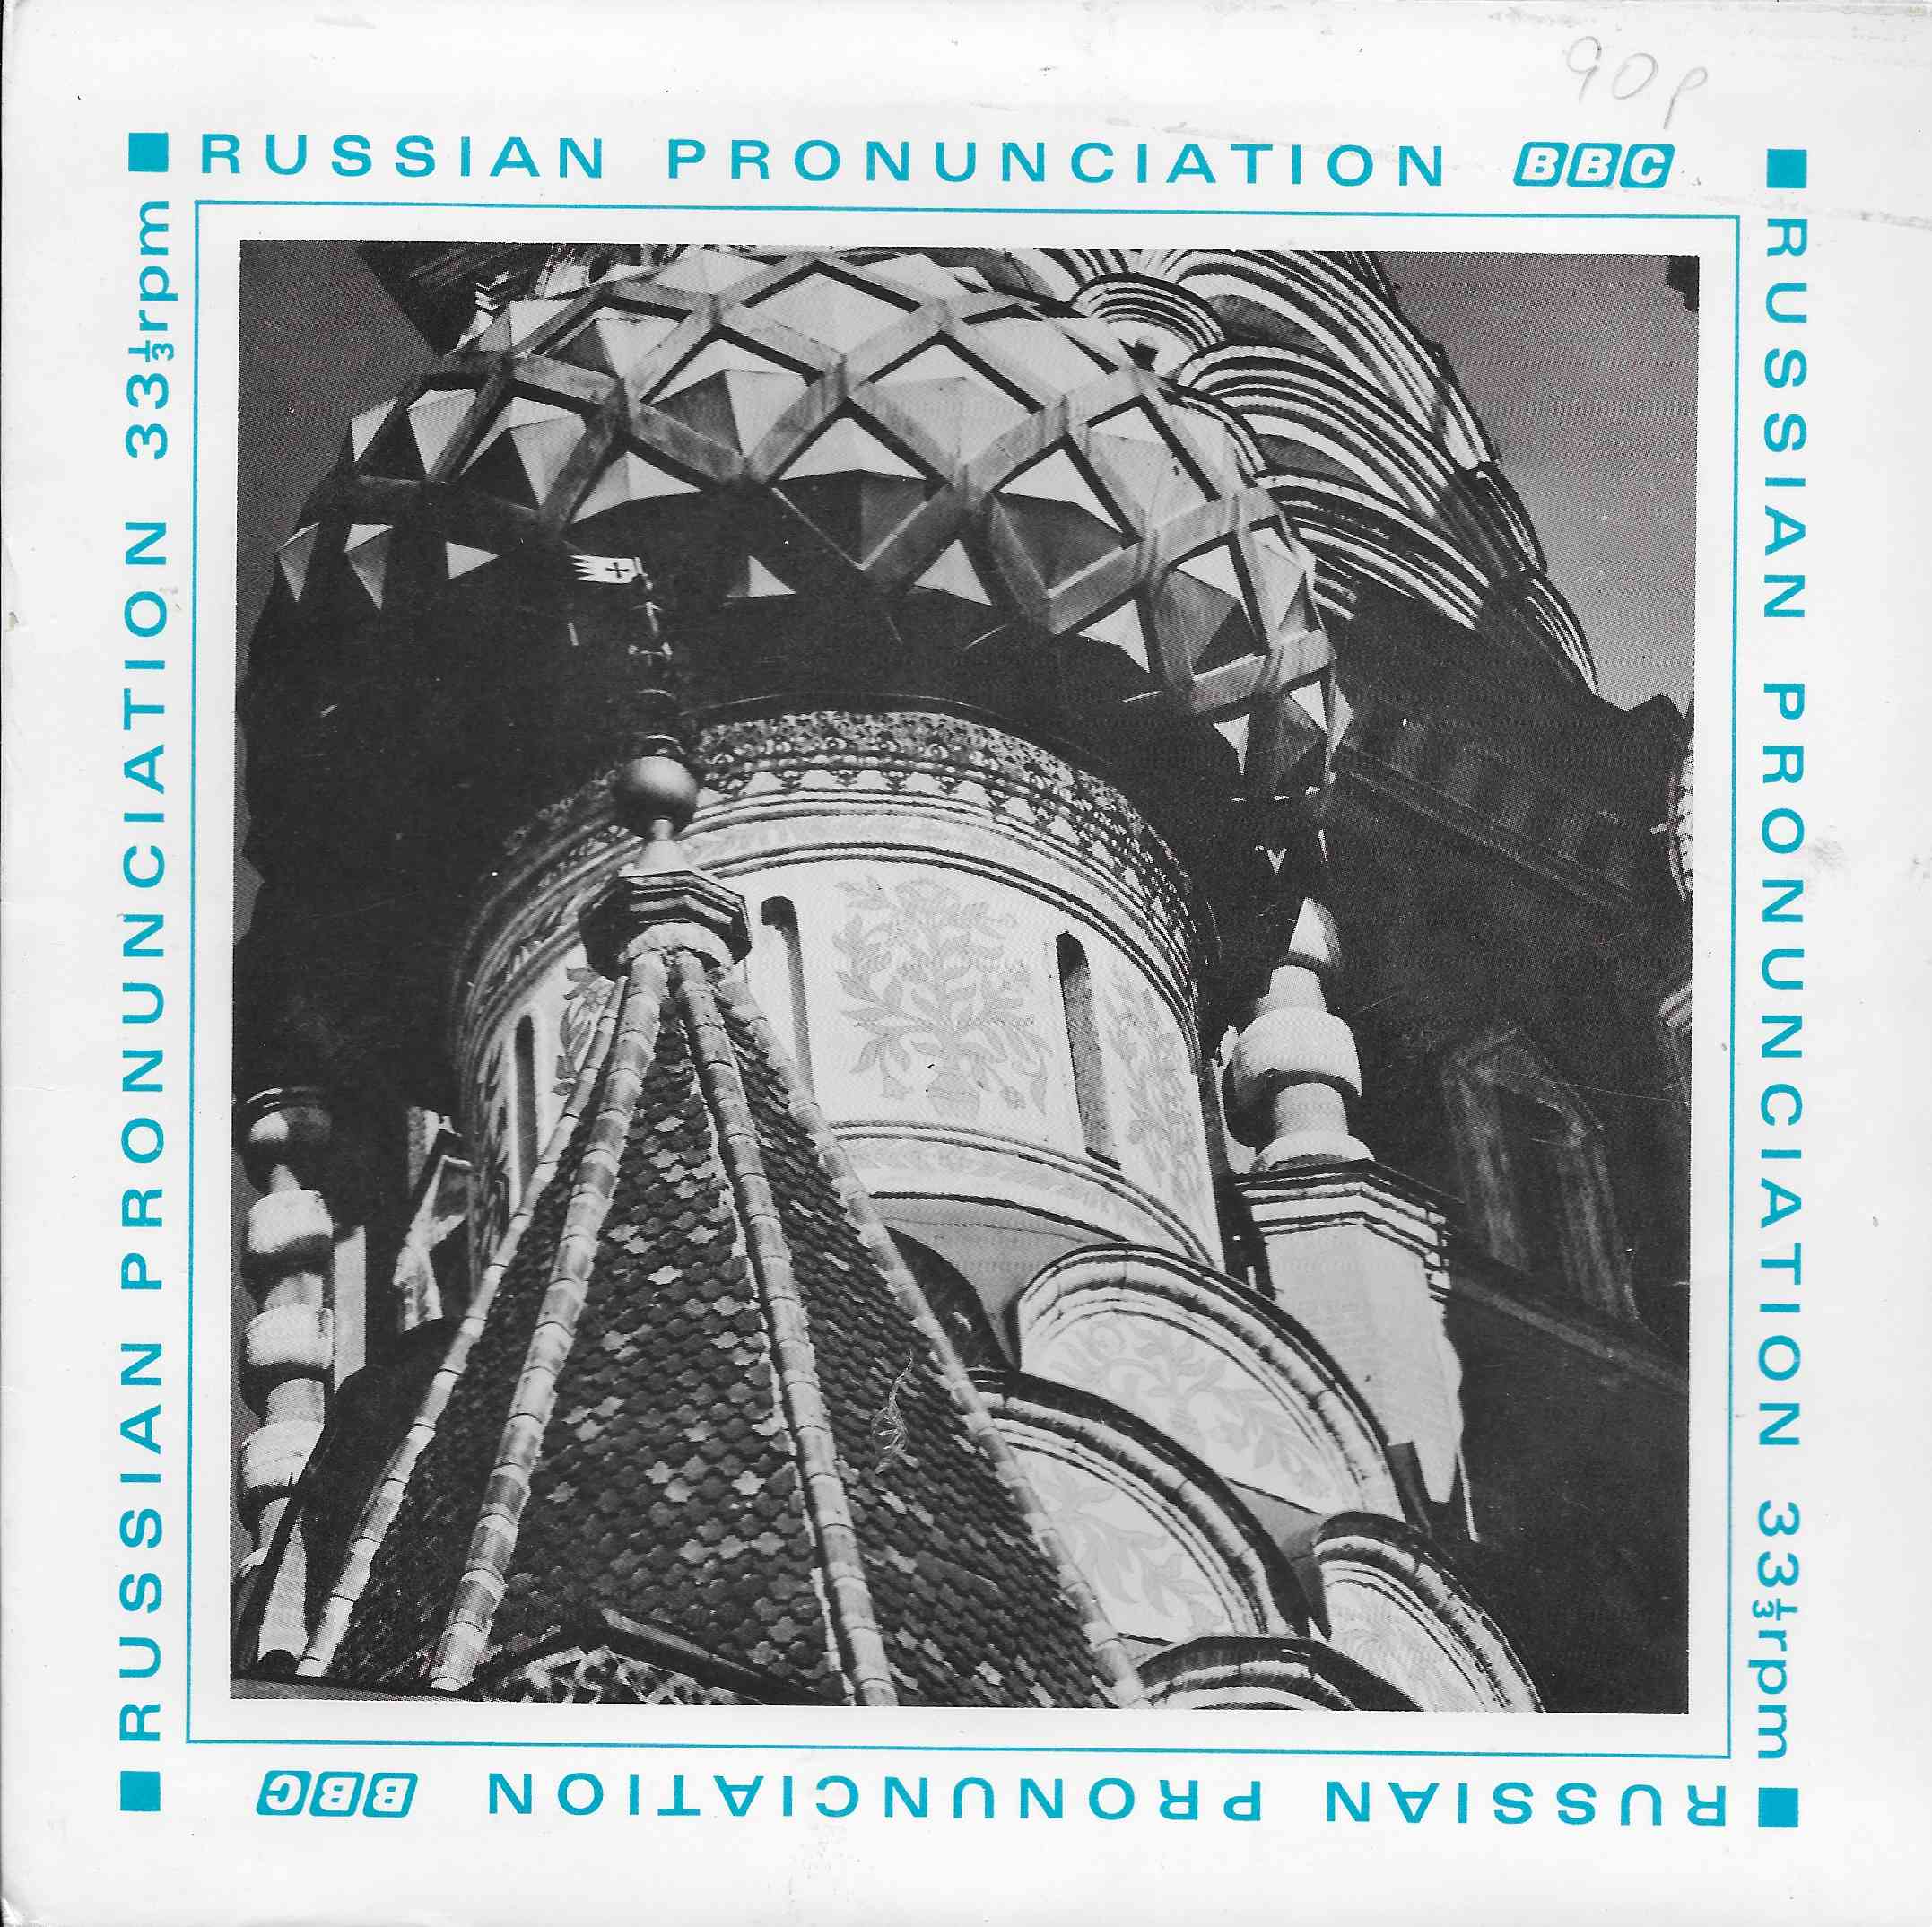 Picture of OP 197 Russian pronunciation - Includes booklet by artist Natalie Waterson from the BBC records and Tapes library